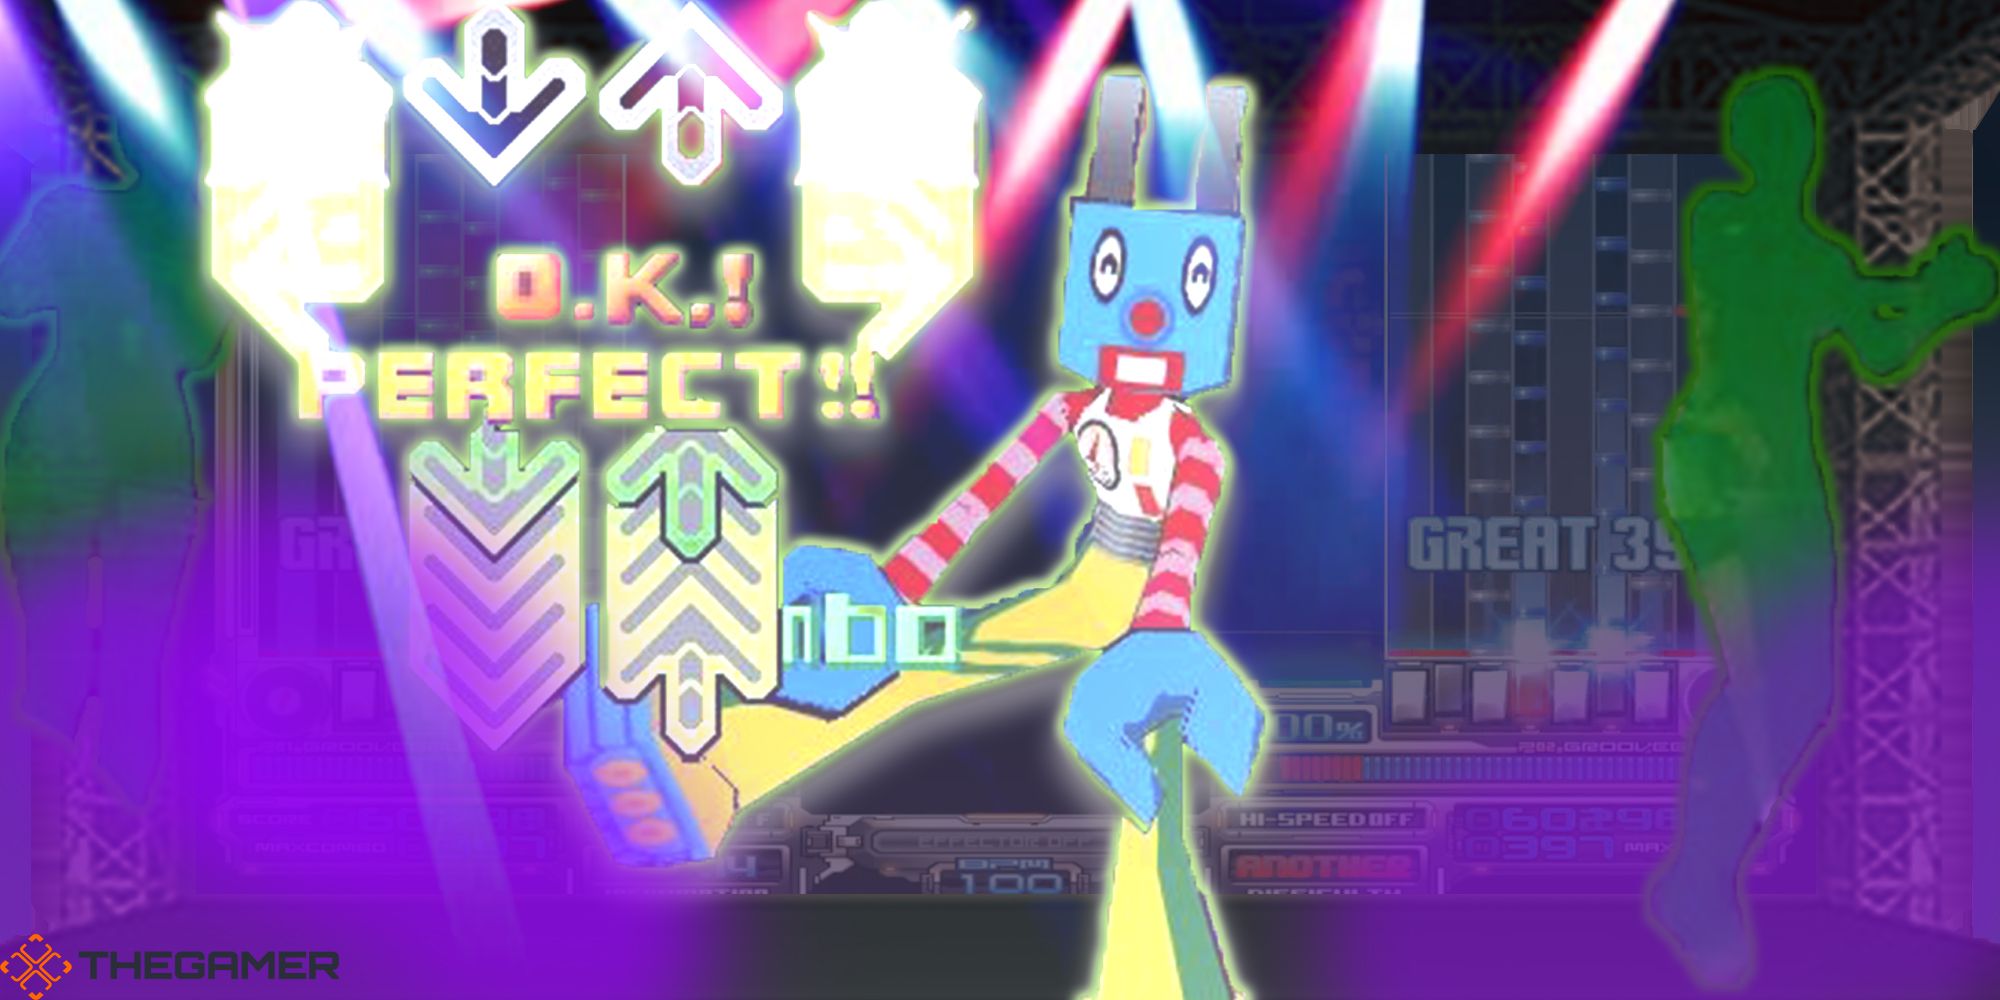 Kosento dances with two holographic background dancers while beatmania footage plays on a massive projector screen at a Bemani music festival. Custom image for TG.